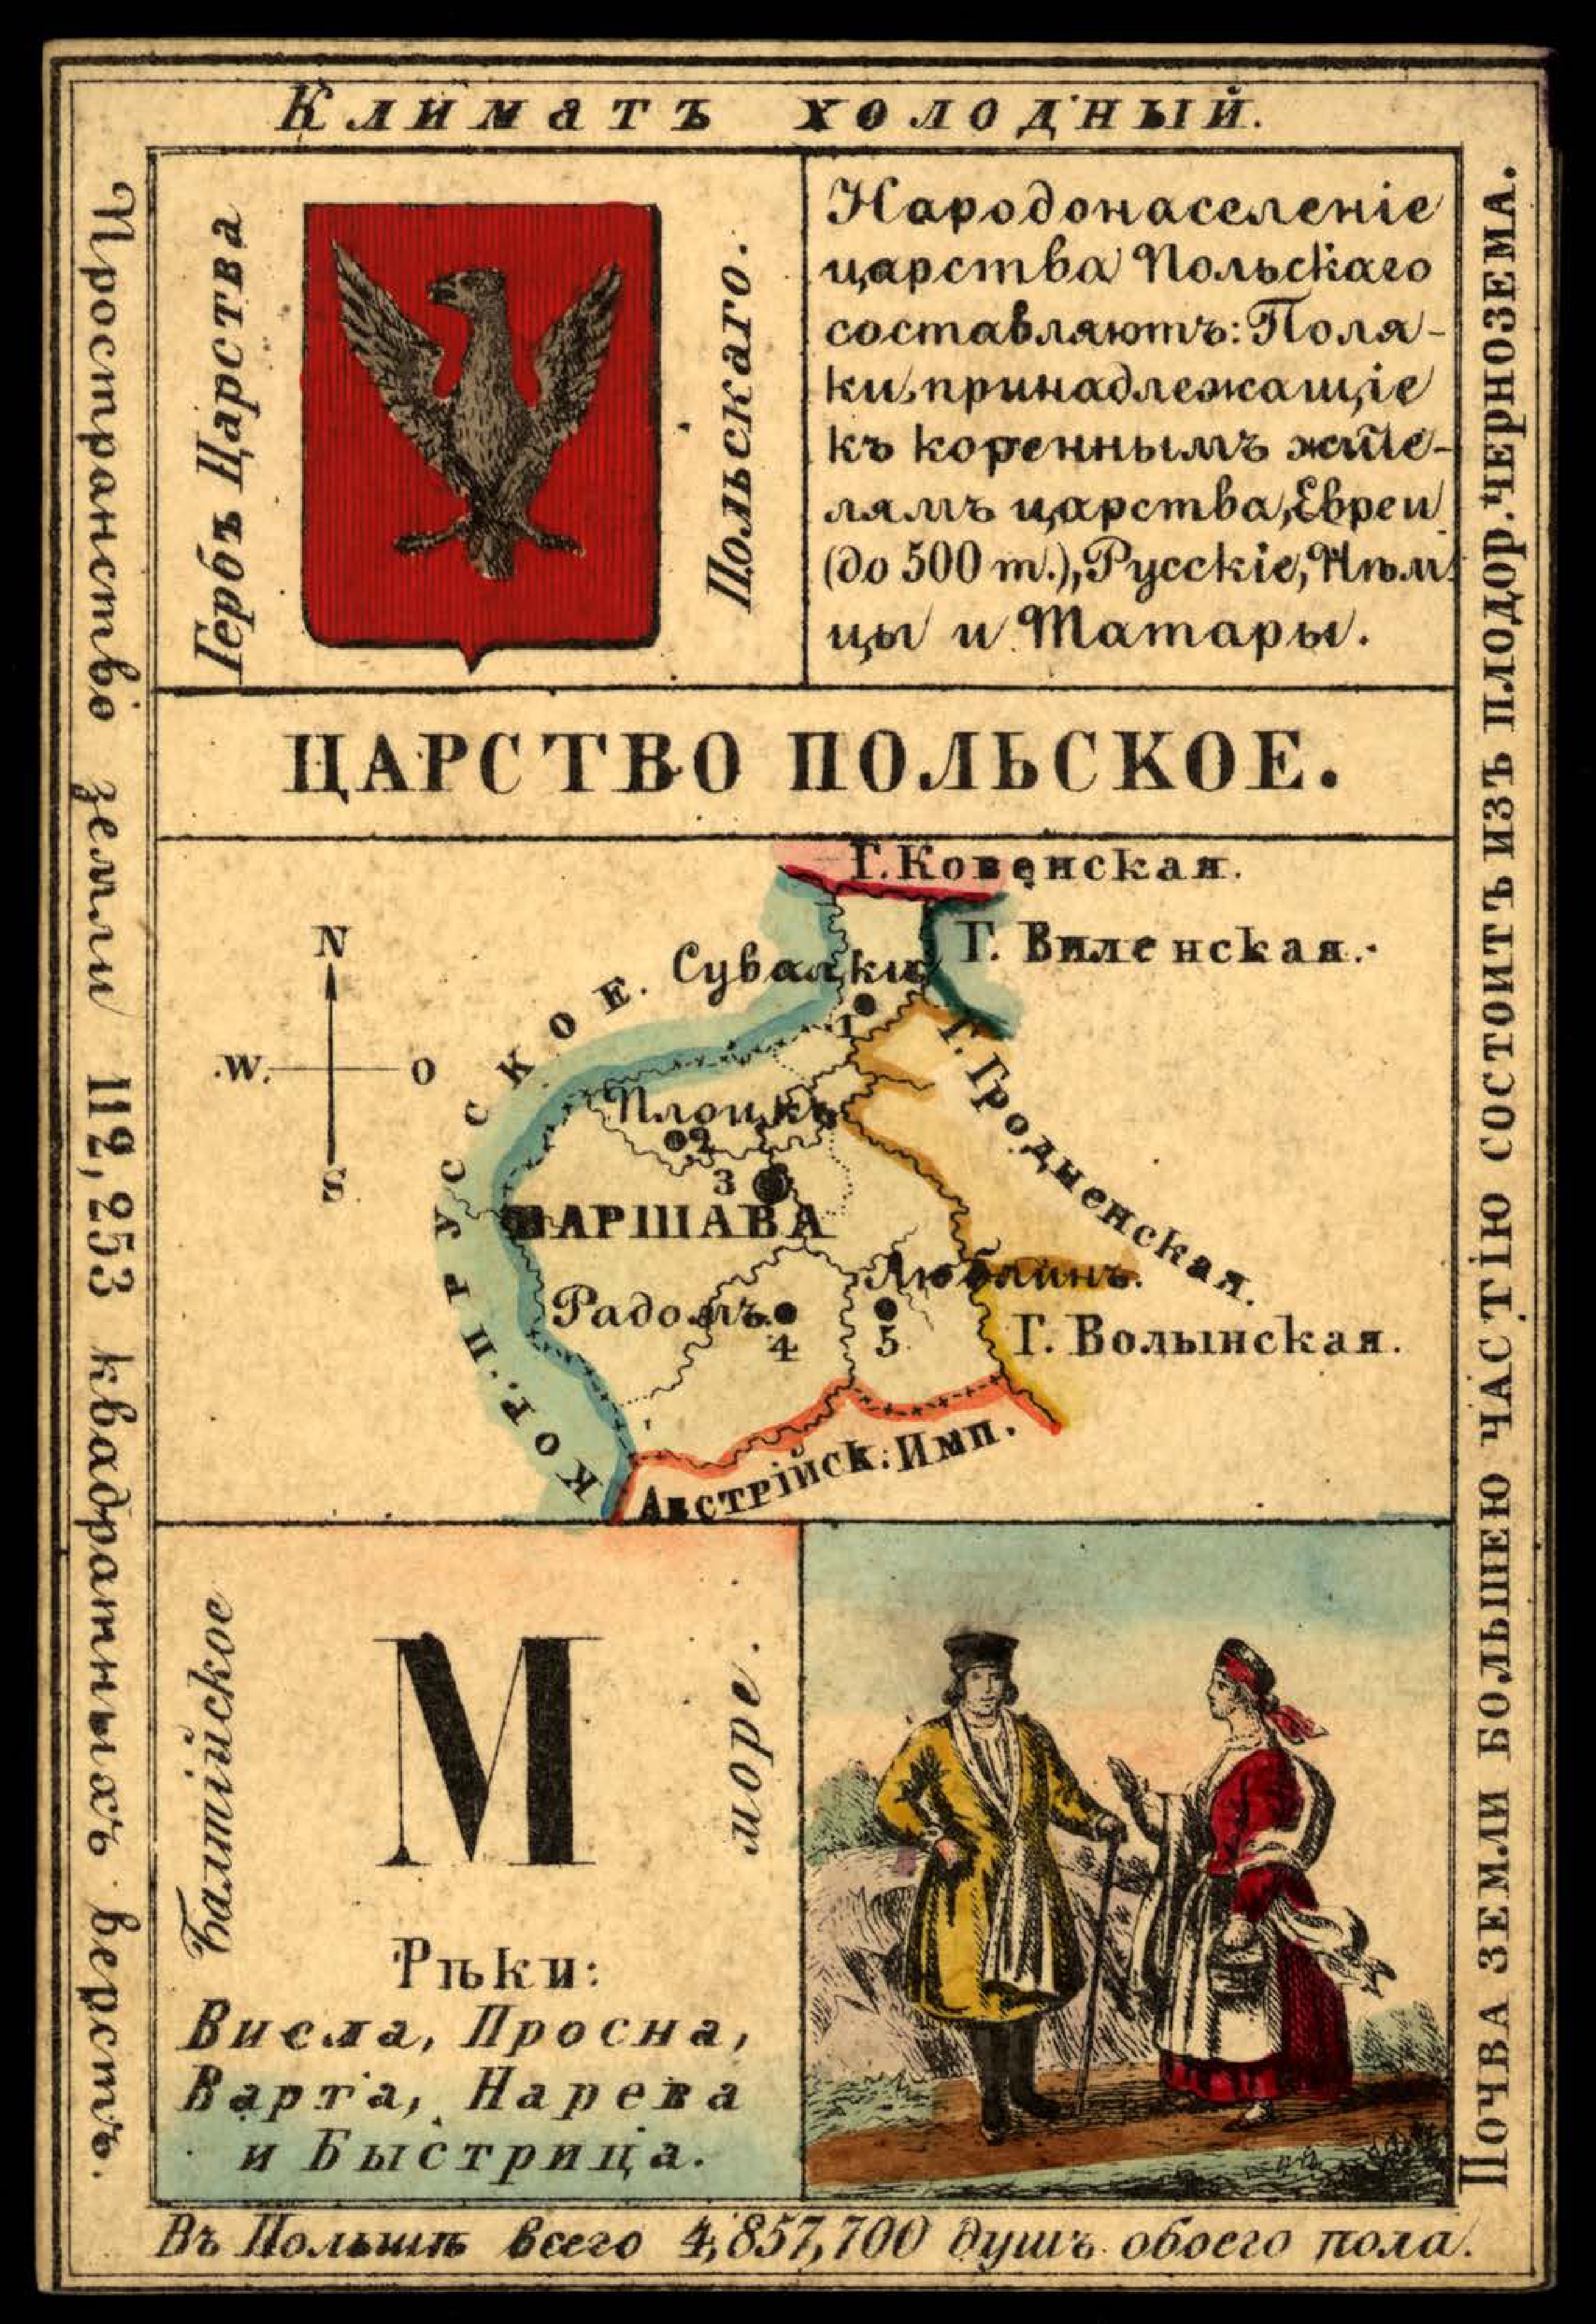 1856. Card from set of geographical cards of the Russian Empire 148